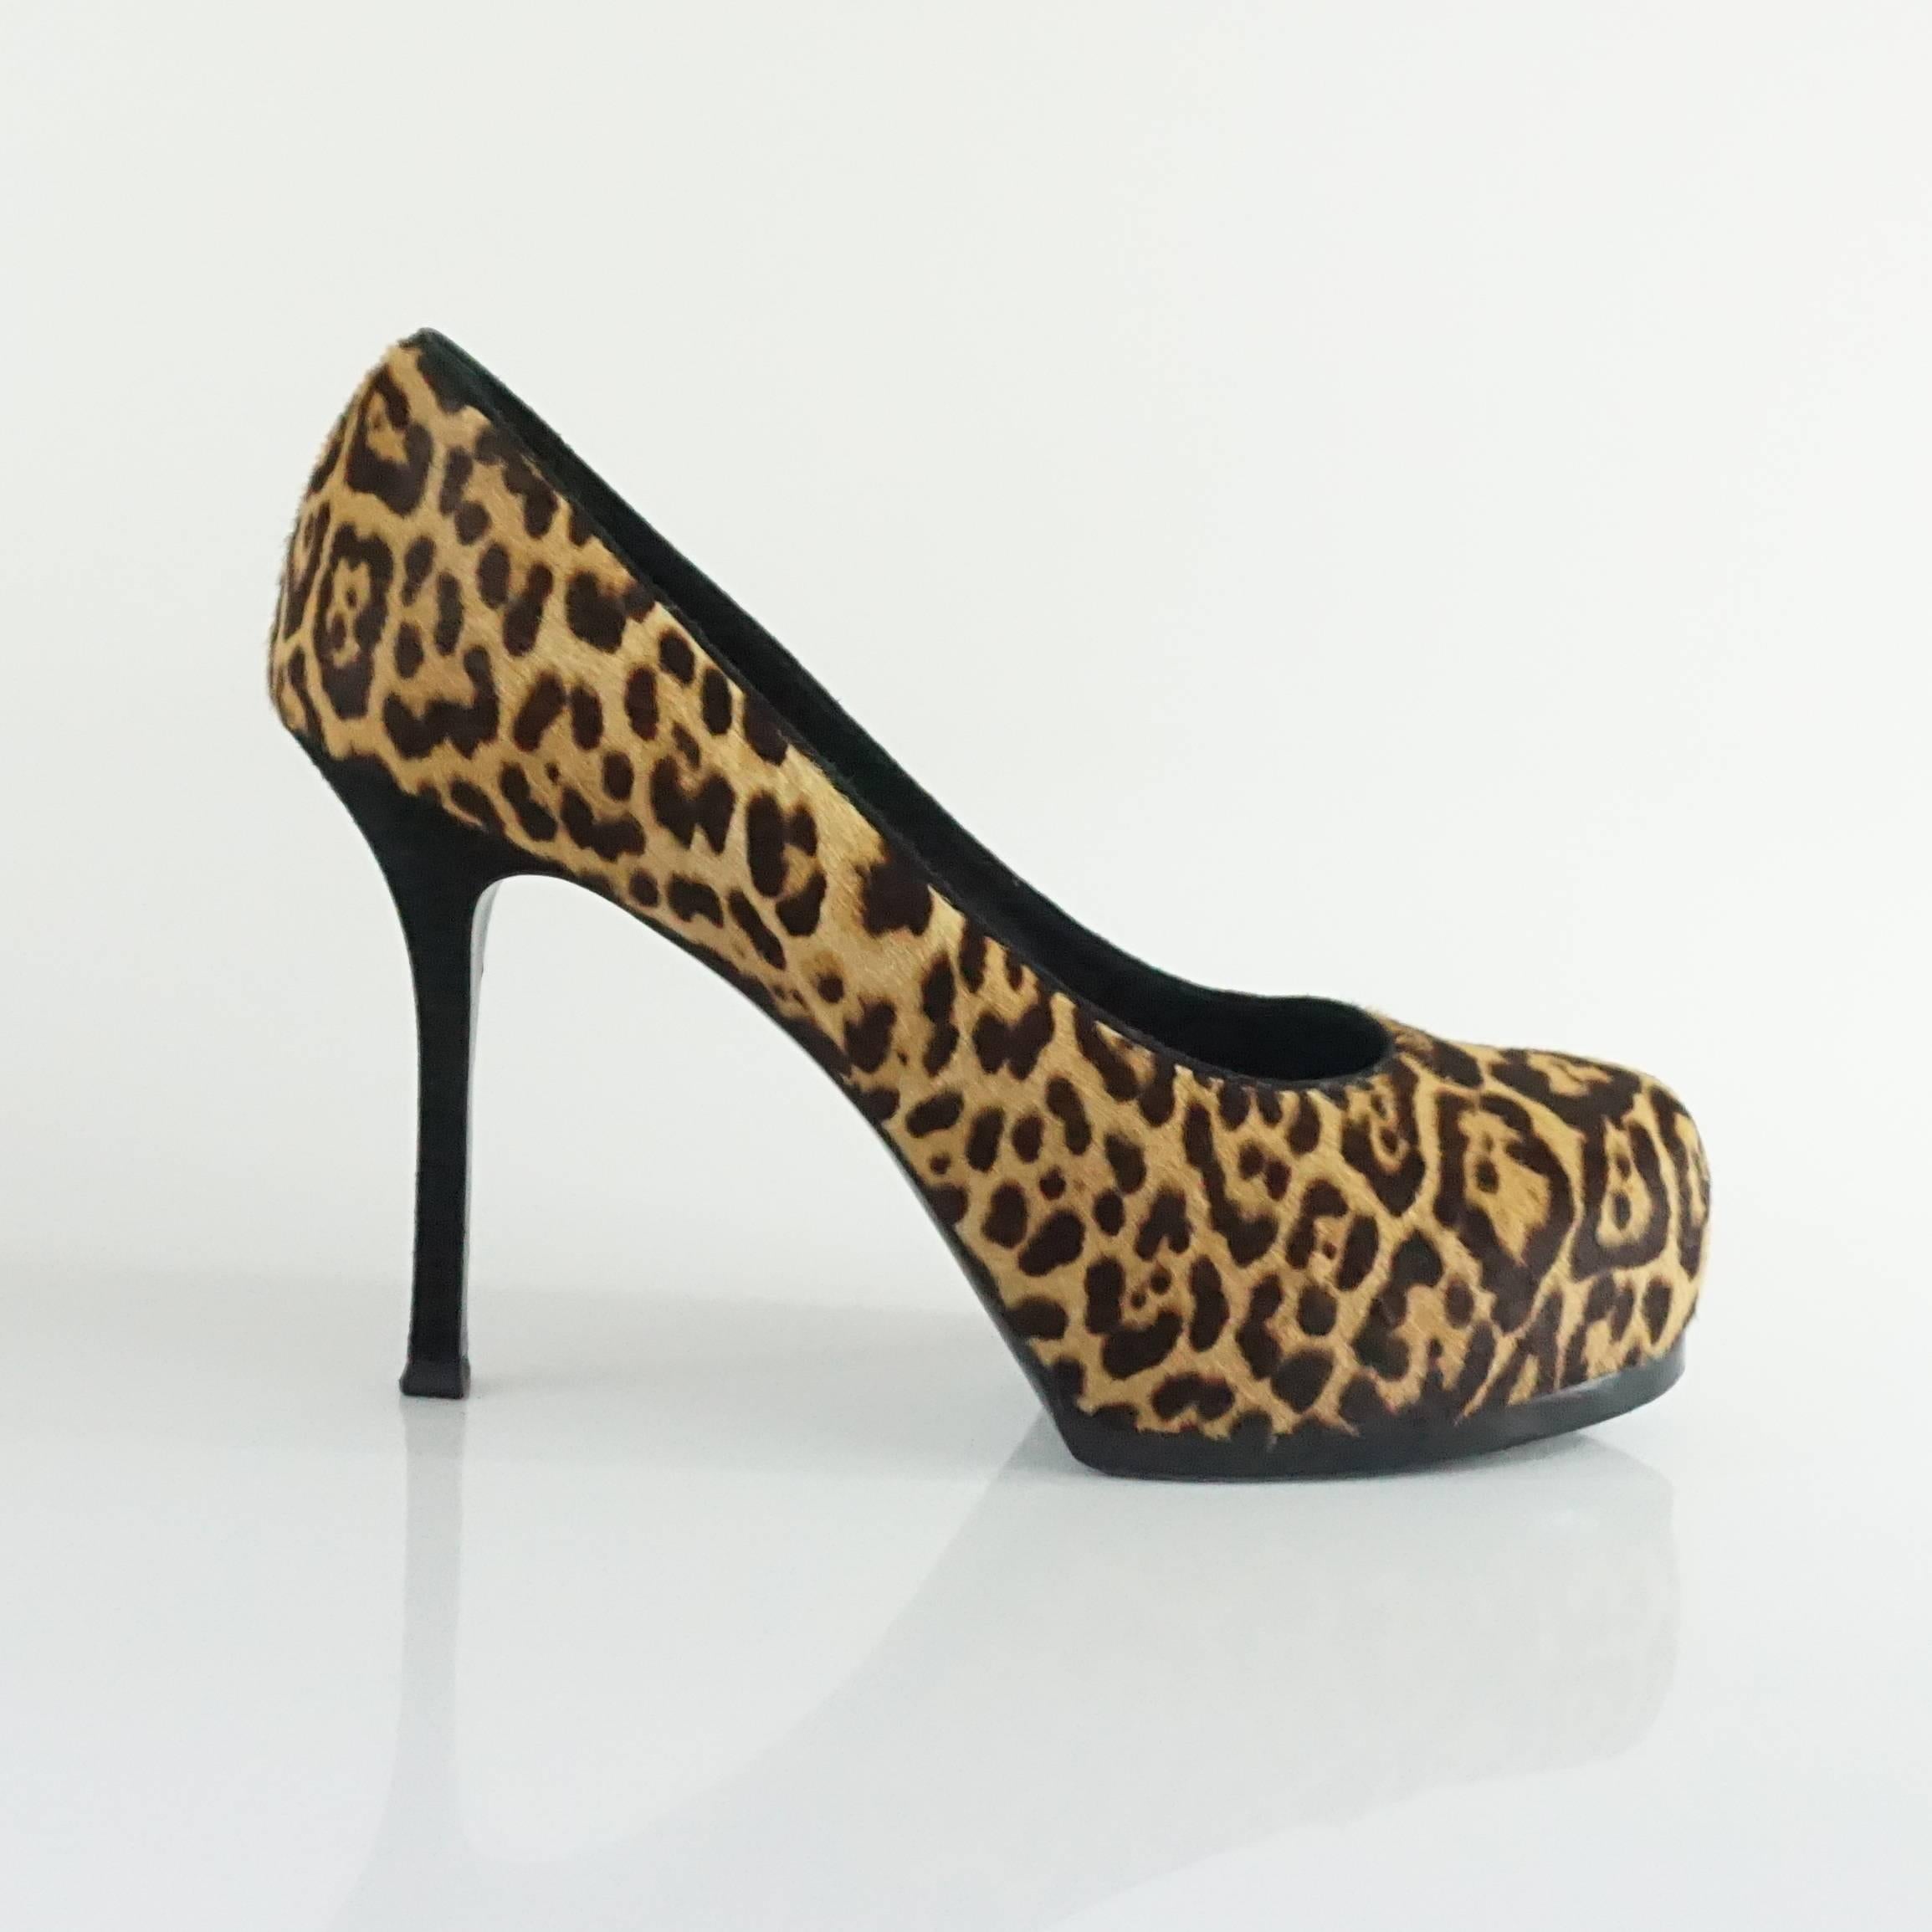 These fun Yves Saint Laurent pony hair platform pumps feature an animal print. They are in very good condition with minor bottom wear and very slight wear to the pony hair.

Measurements
Heel Height: 4.5"
Platform Height: 1"